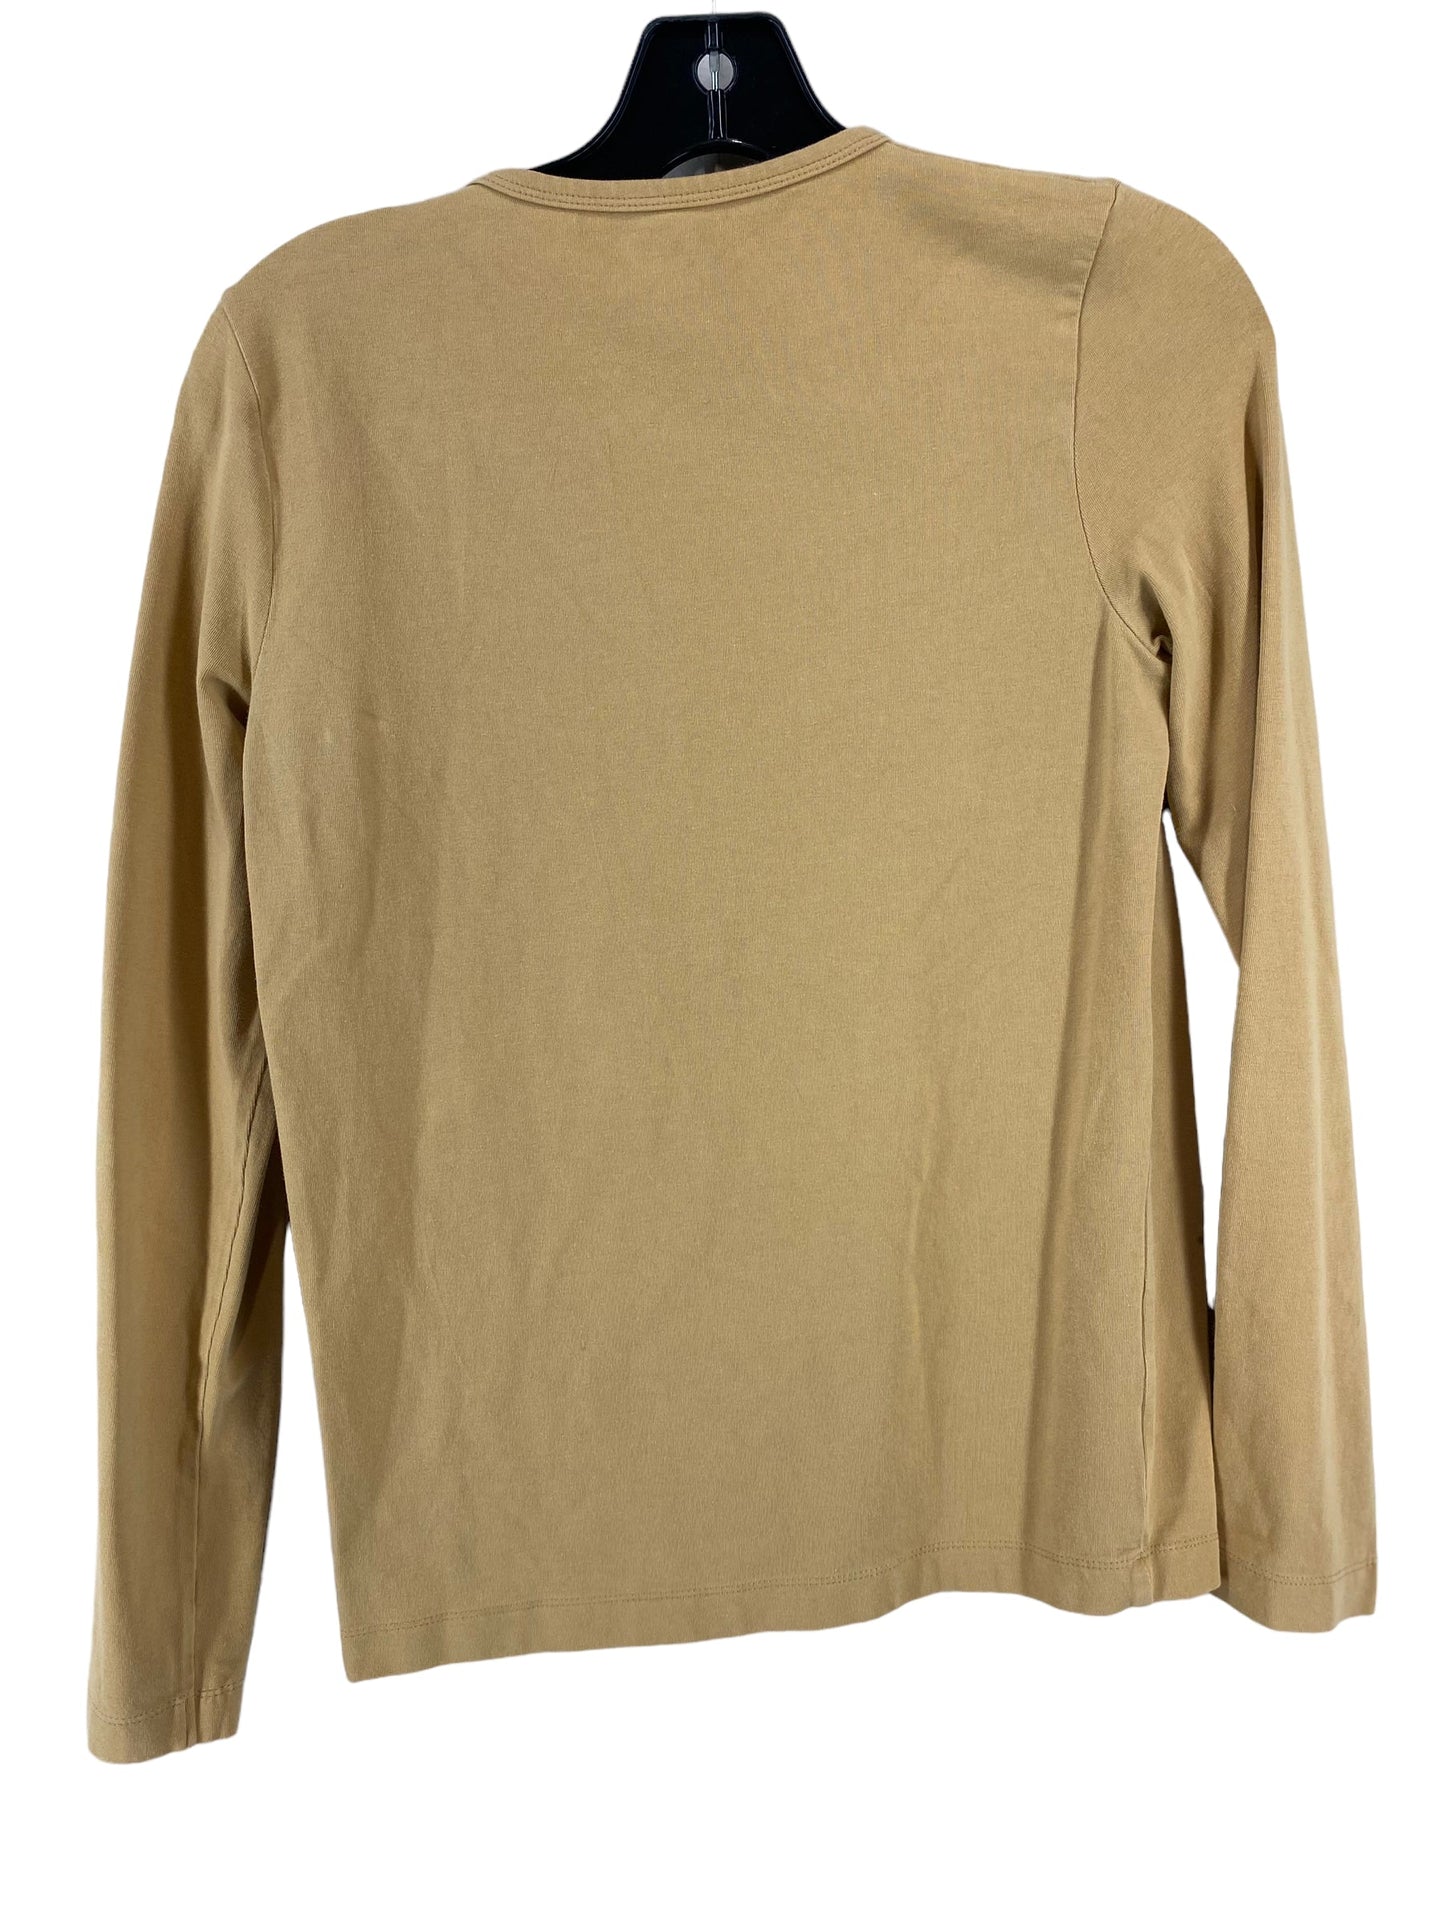 Top Long Sleeve Basic By Jones And Co  Size: S